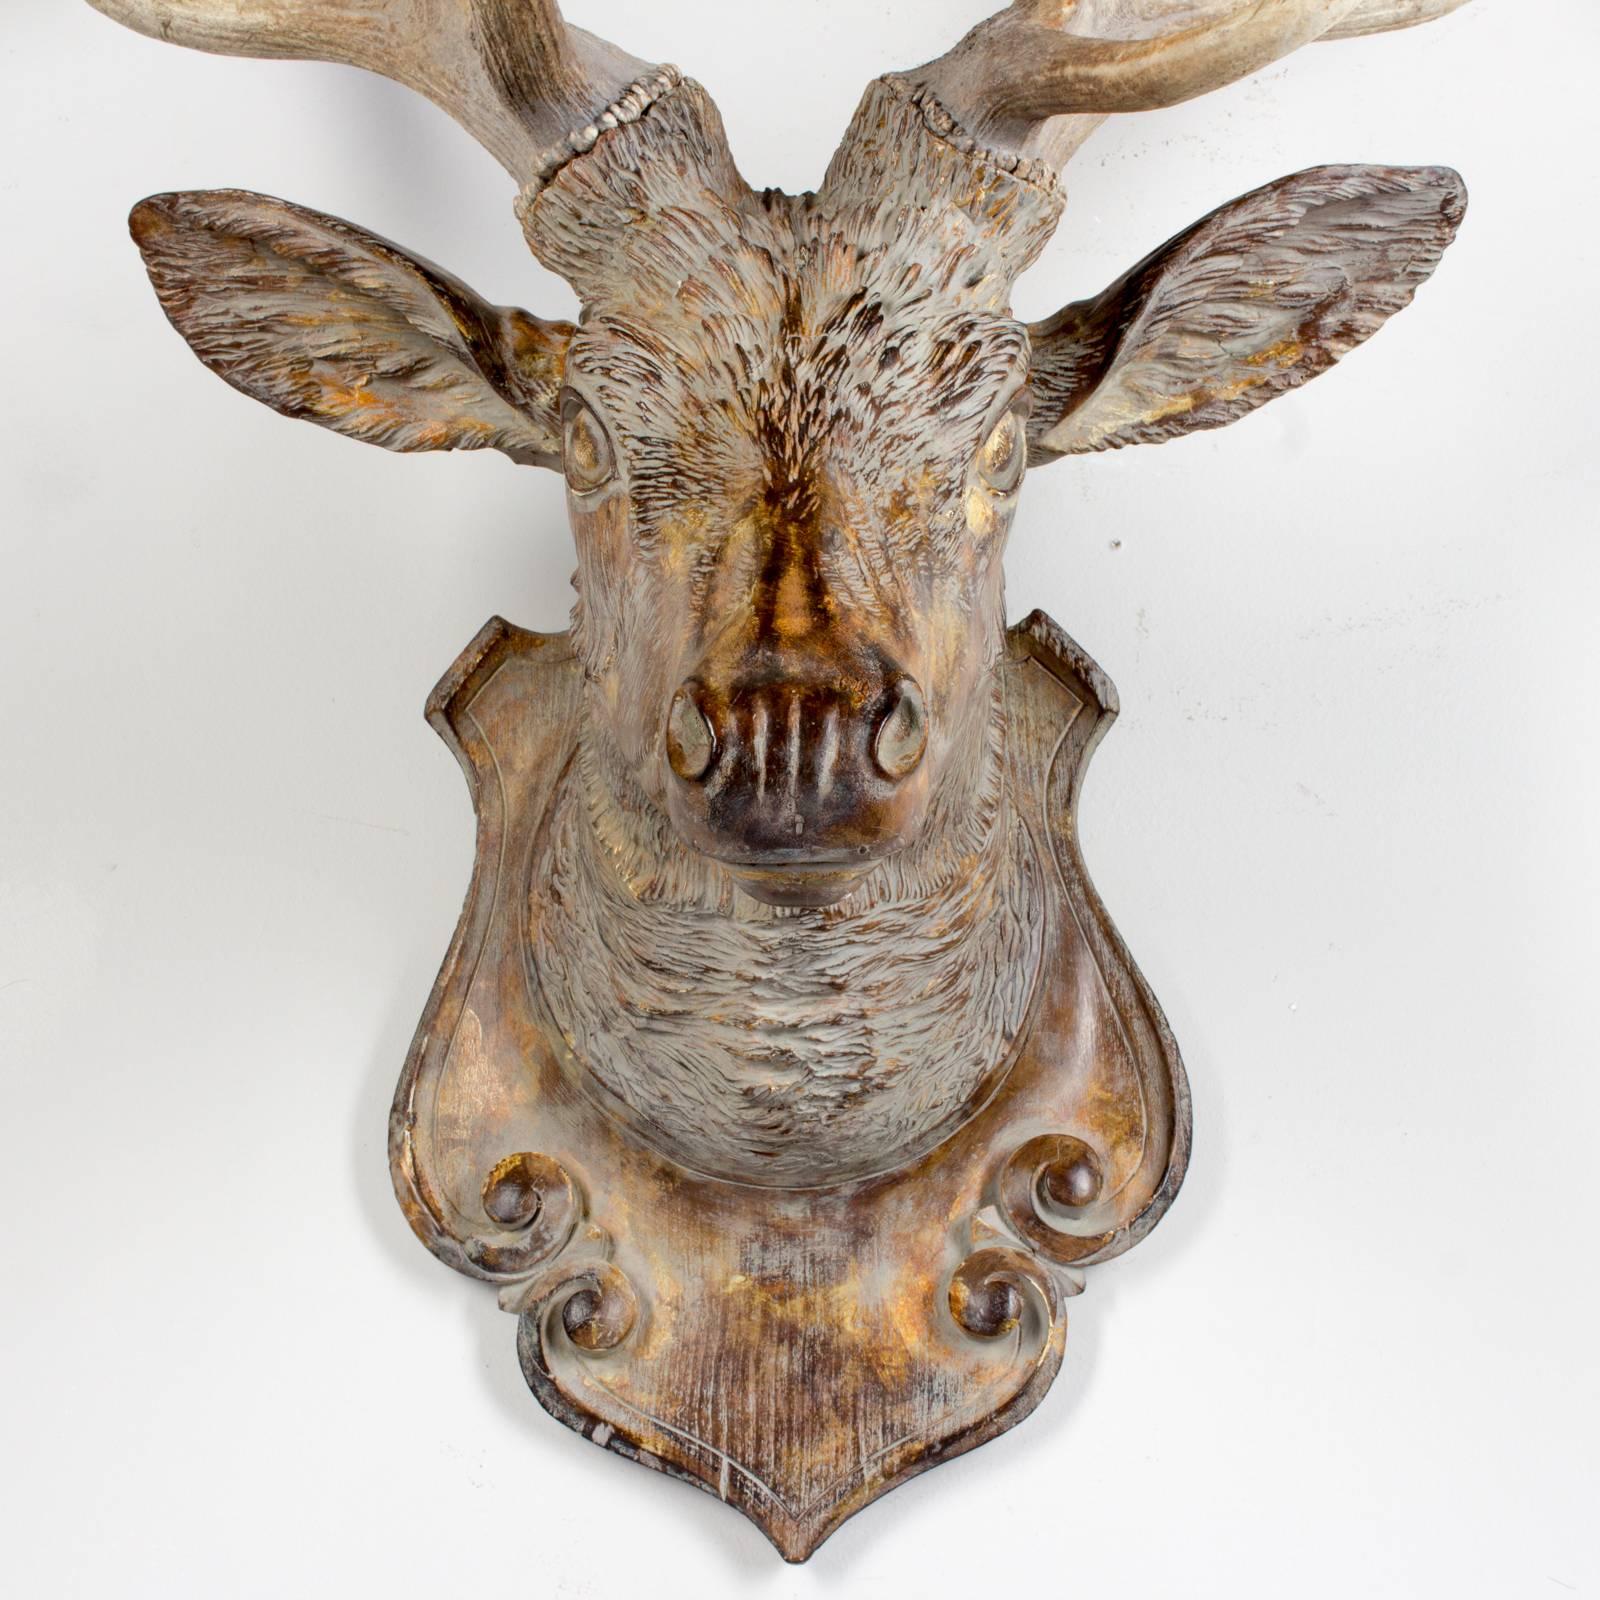 Hand-Crafted Terracotta Fallow Deer Trophy with Antique Habsburg Antlers from Austria